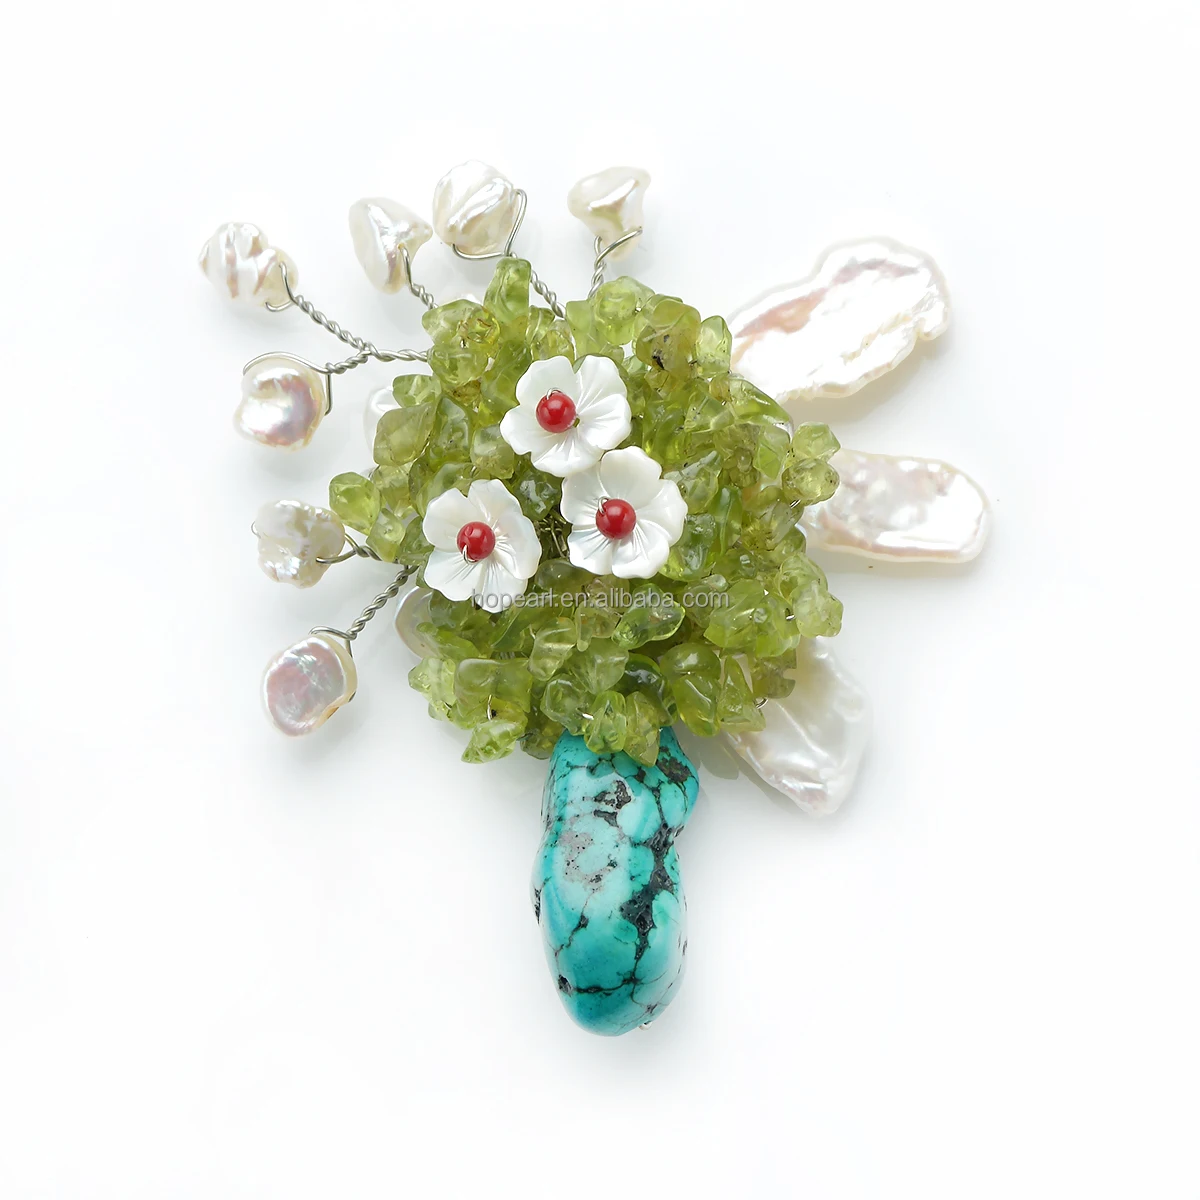 

BRH126 Flowers Designs Turquoise with Peridot Chips Stone and White Baroque Pearls Brooch